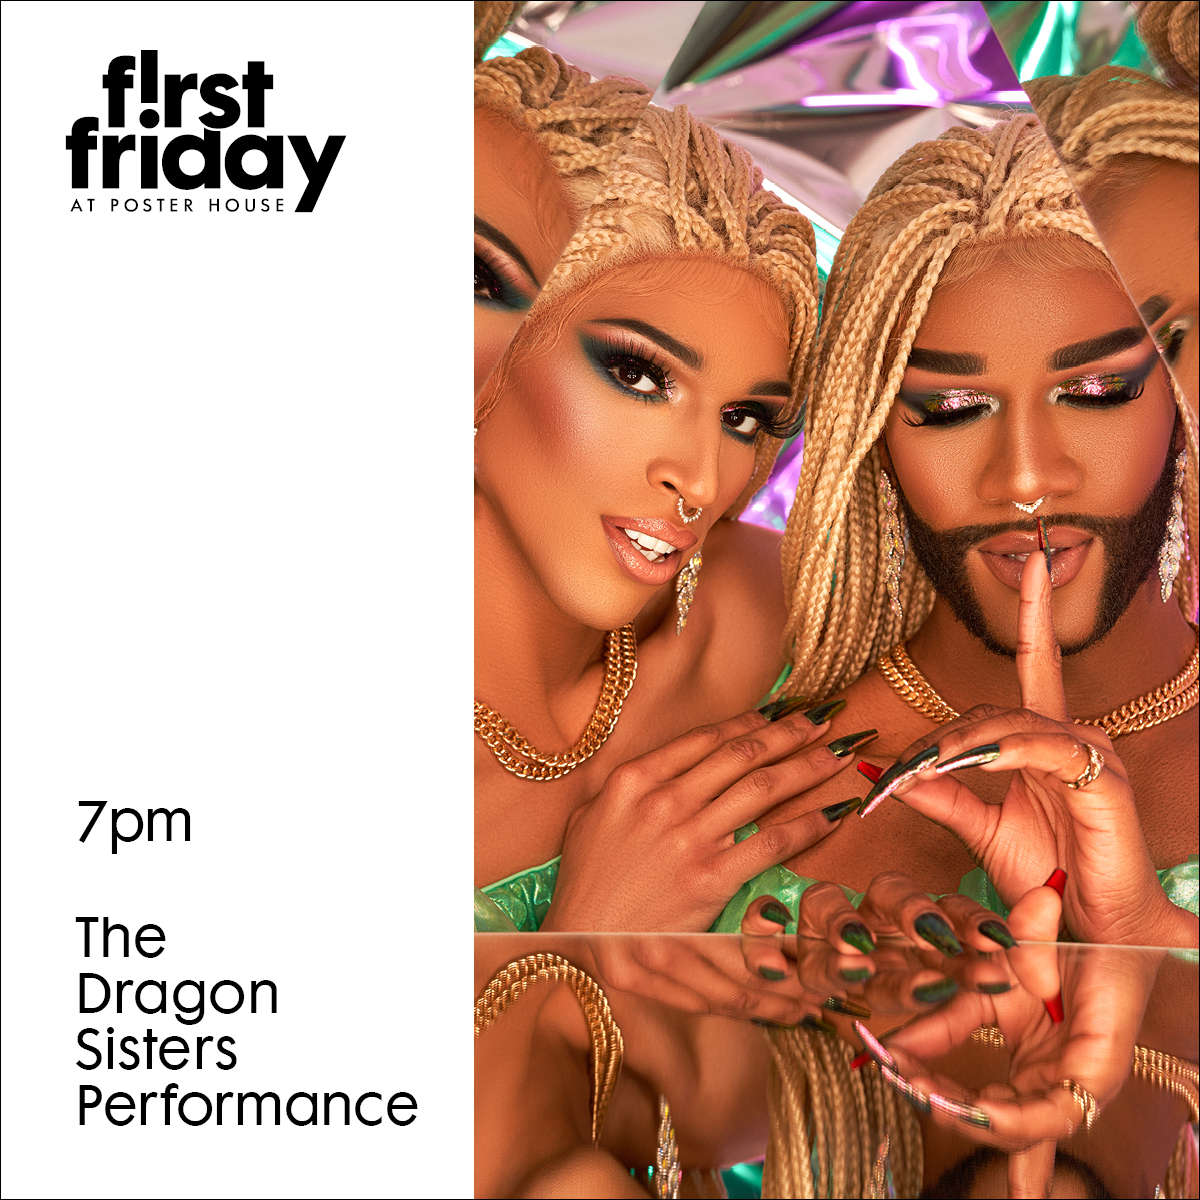 First Friday free admission featuring the Dragon Sisters.